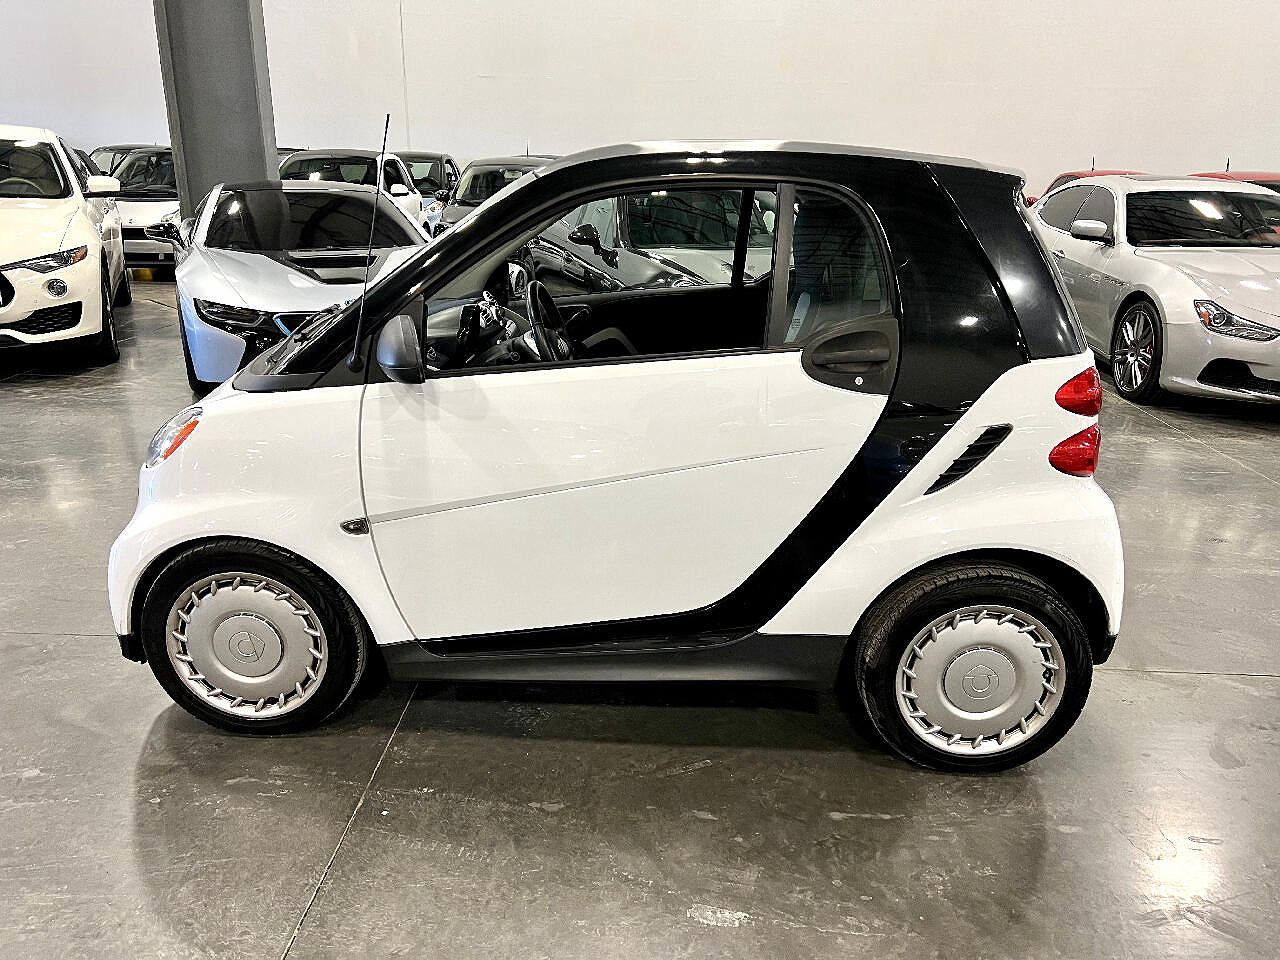 2015 Smart Fortwo Passion image 4